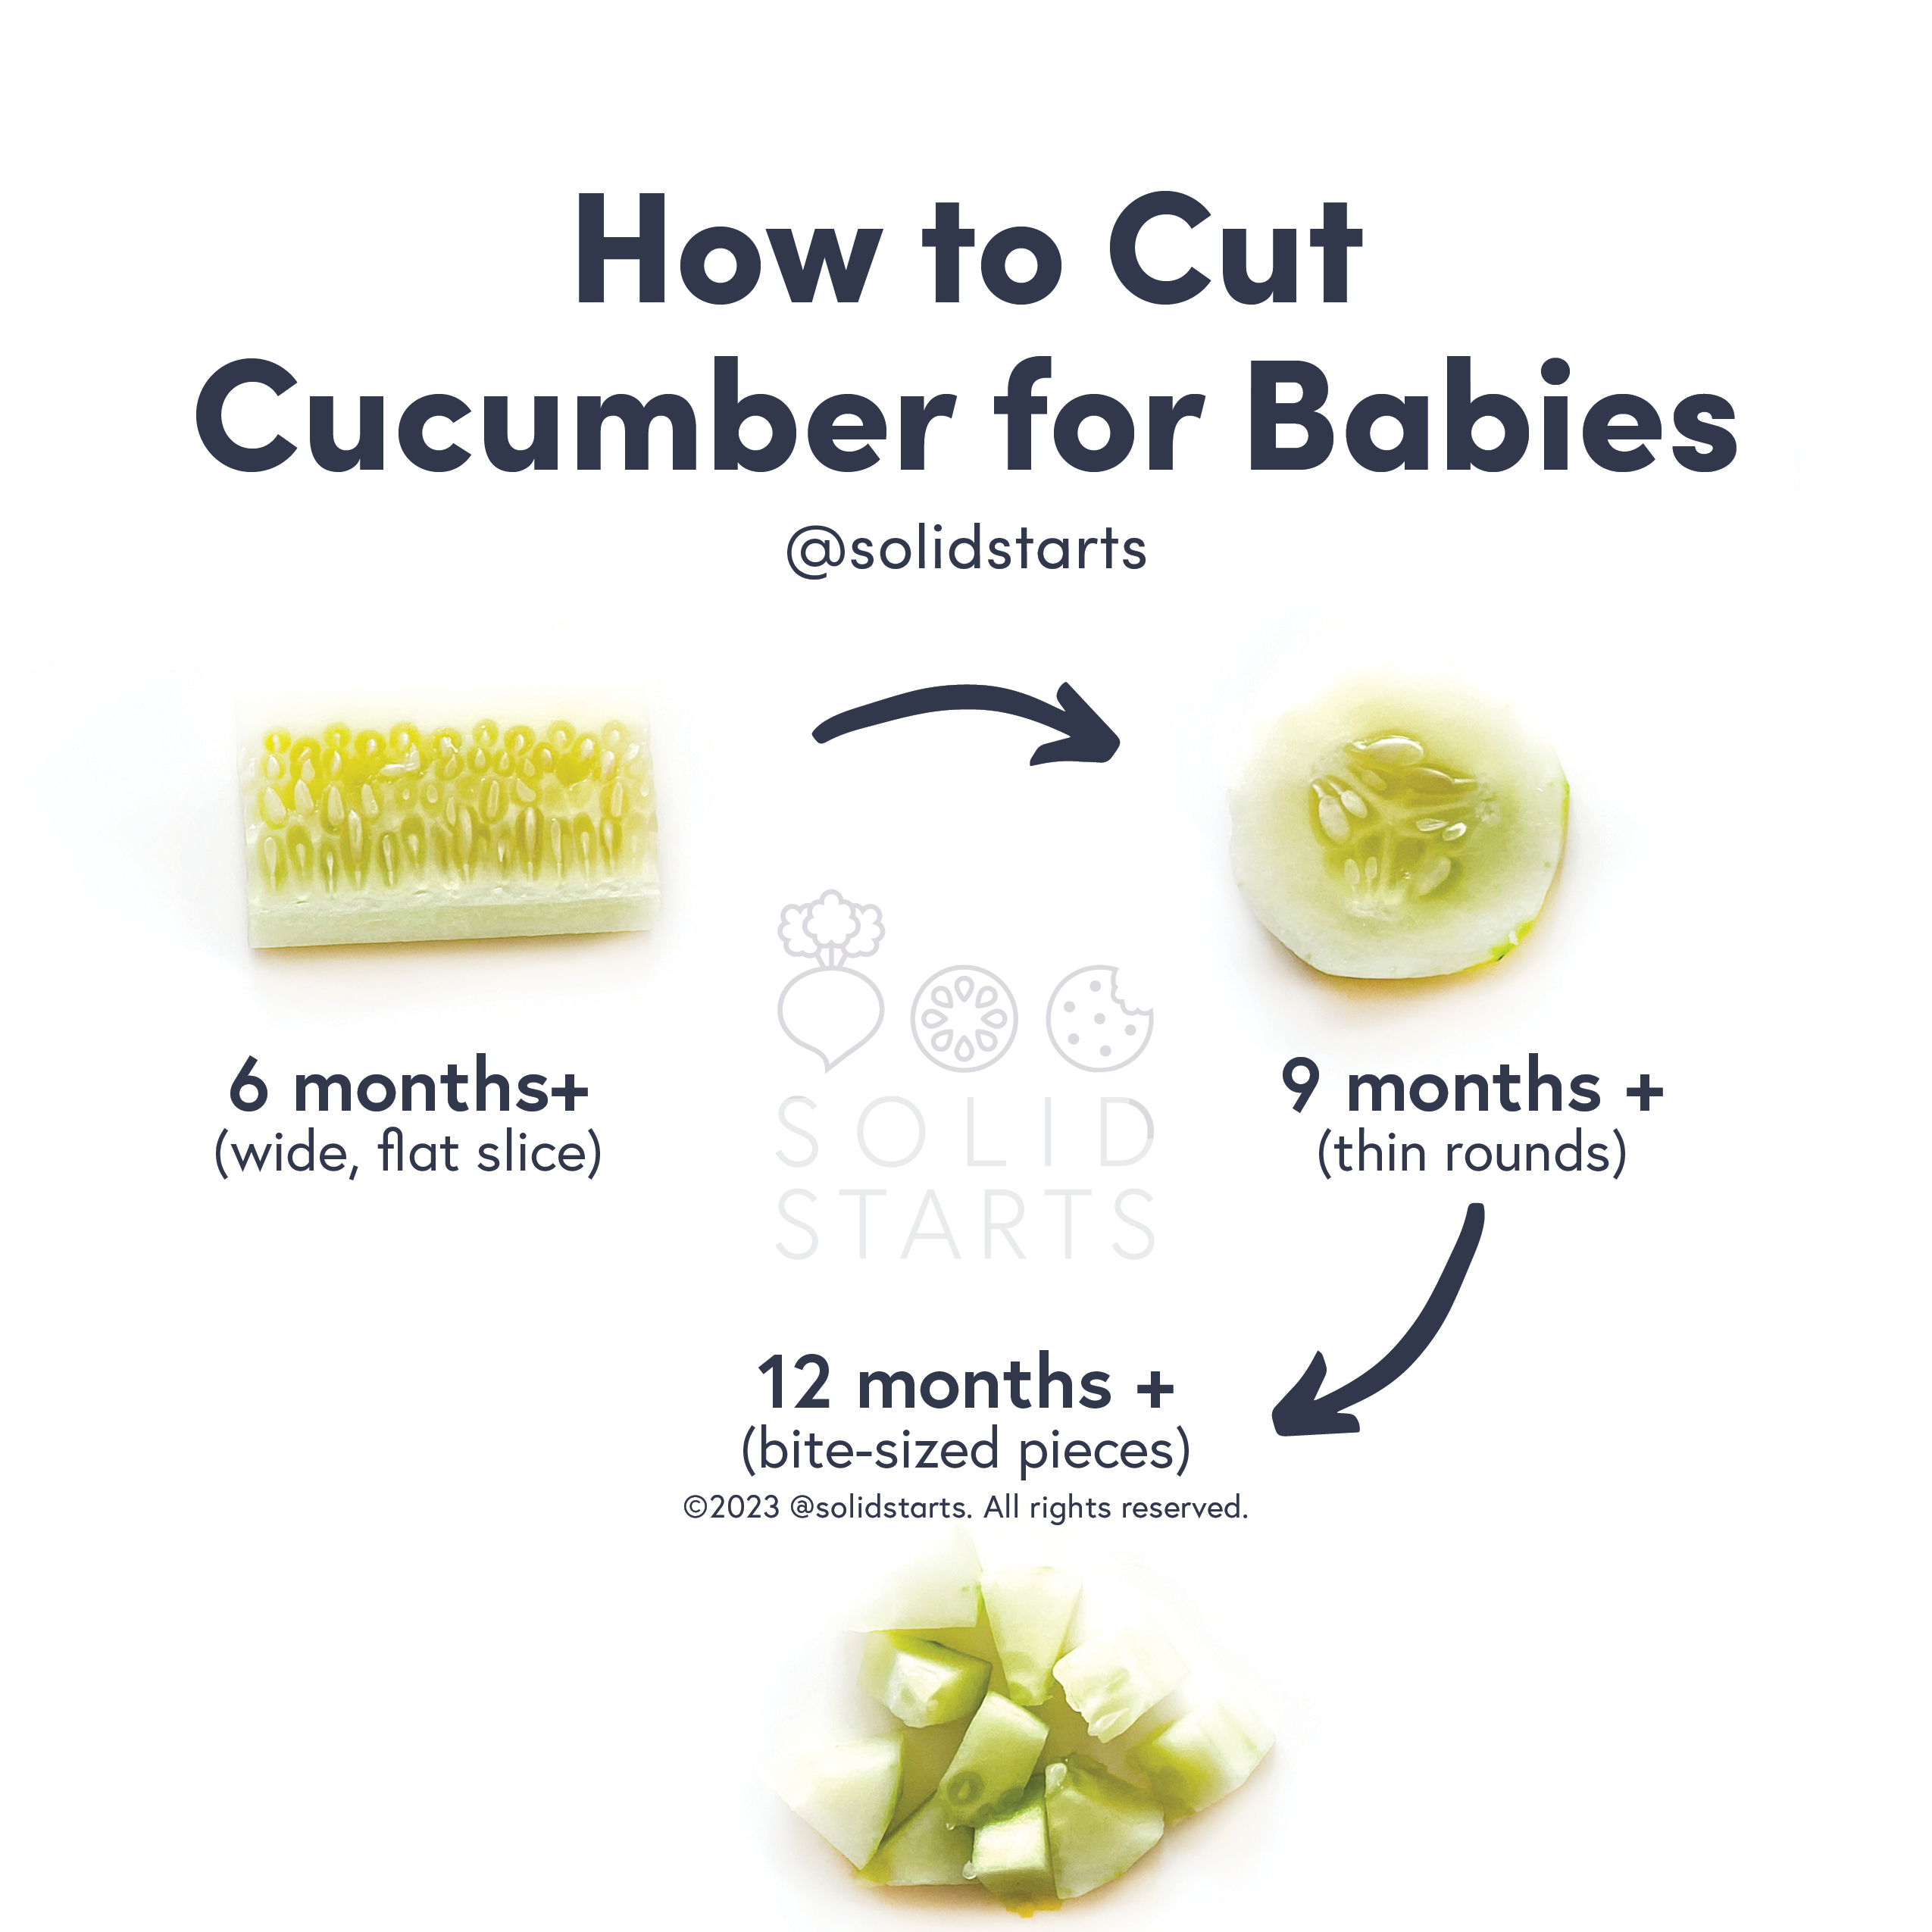 How to Dice a Cucumber